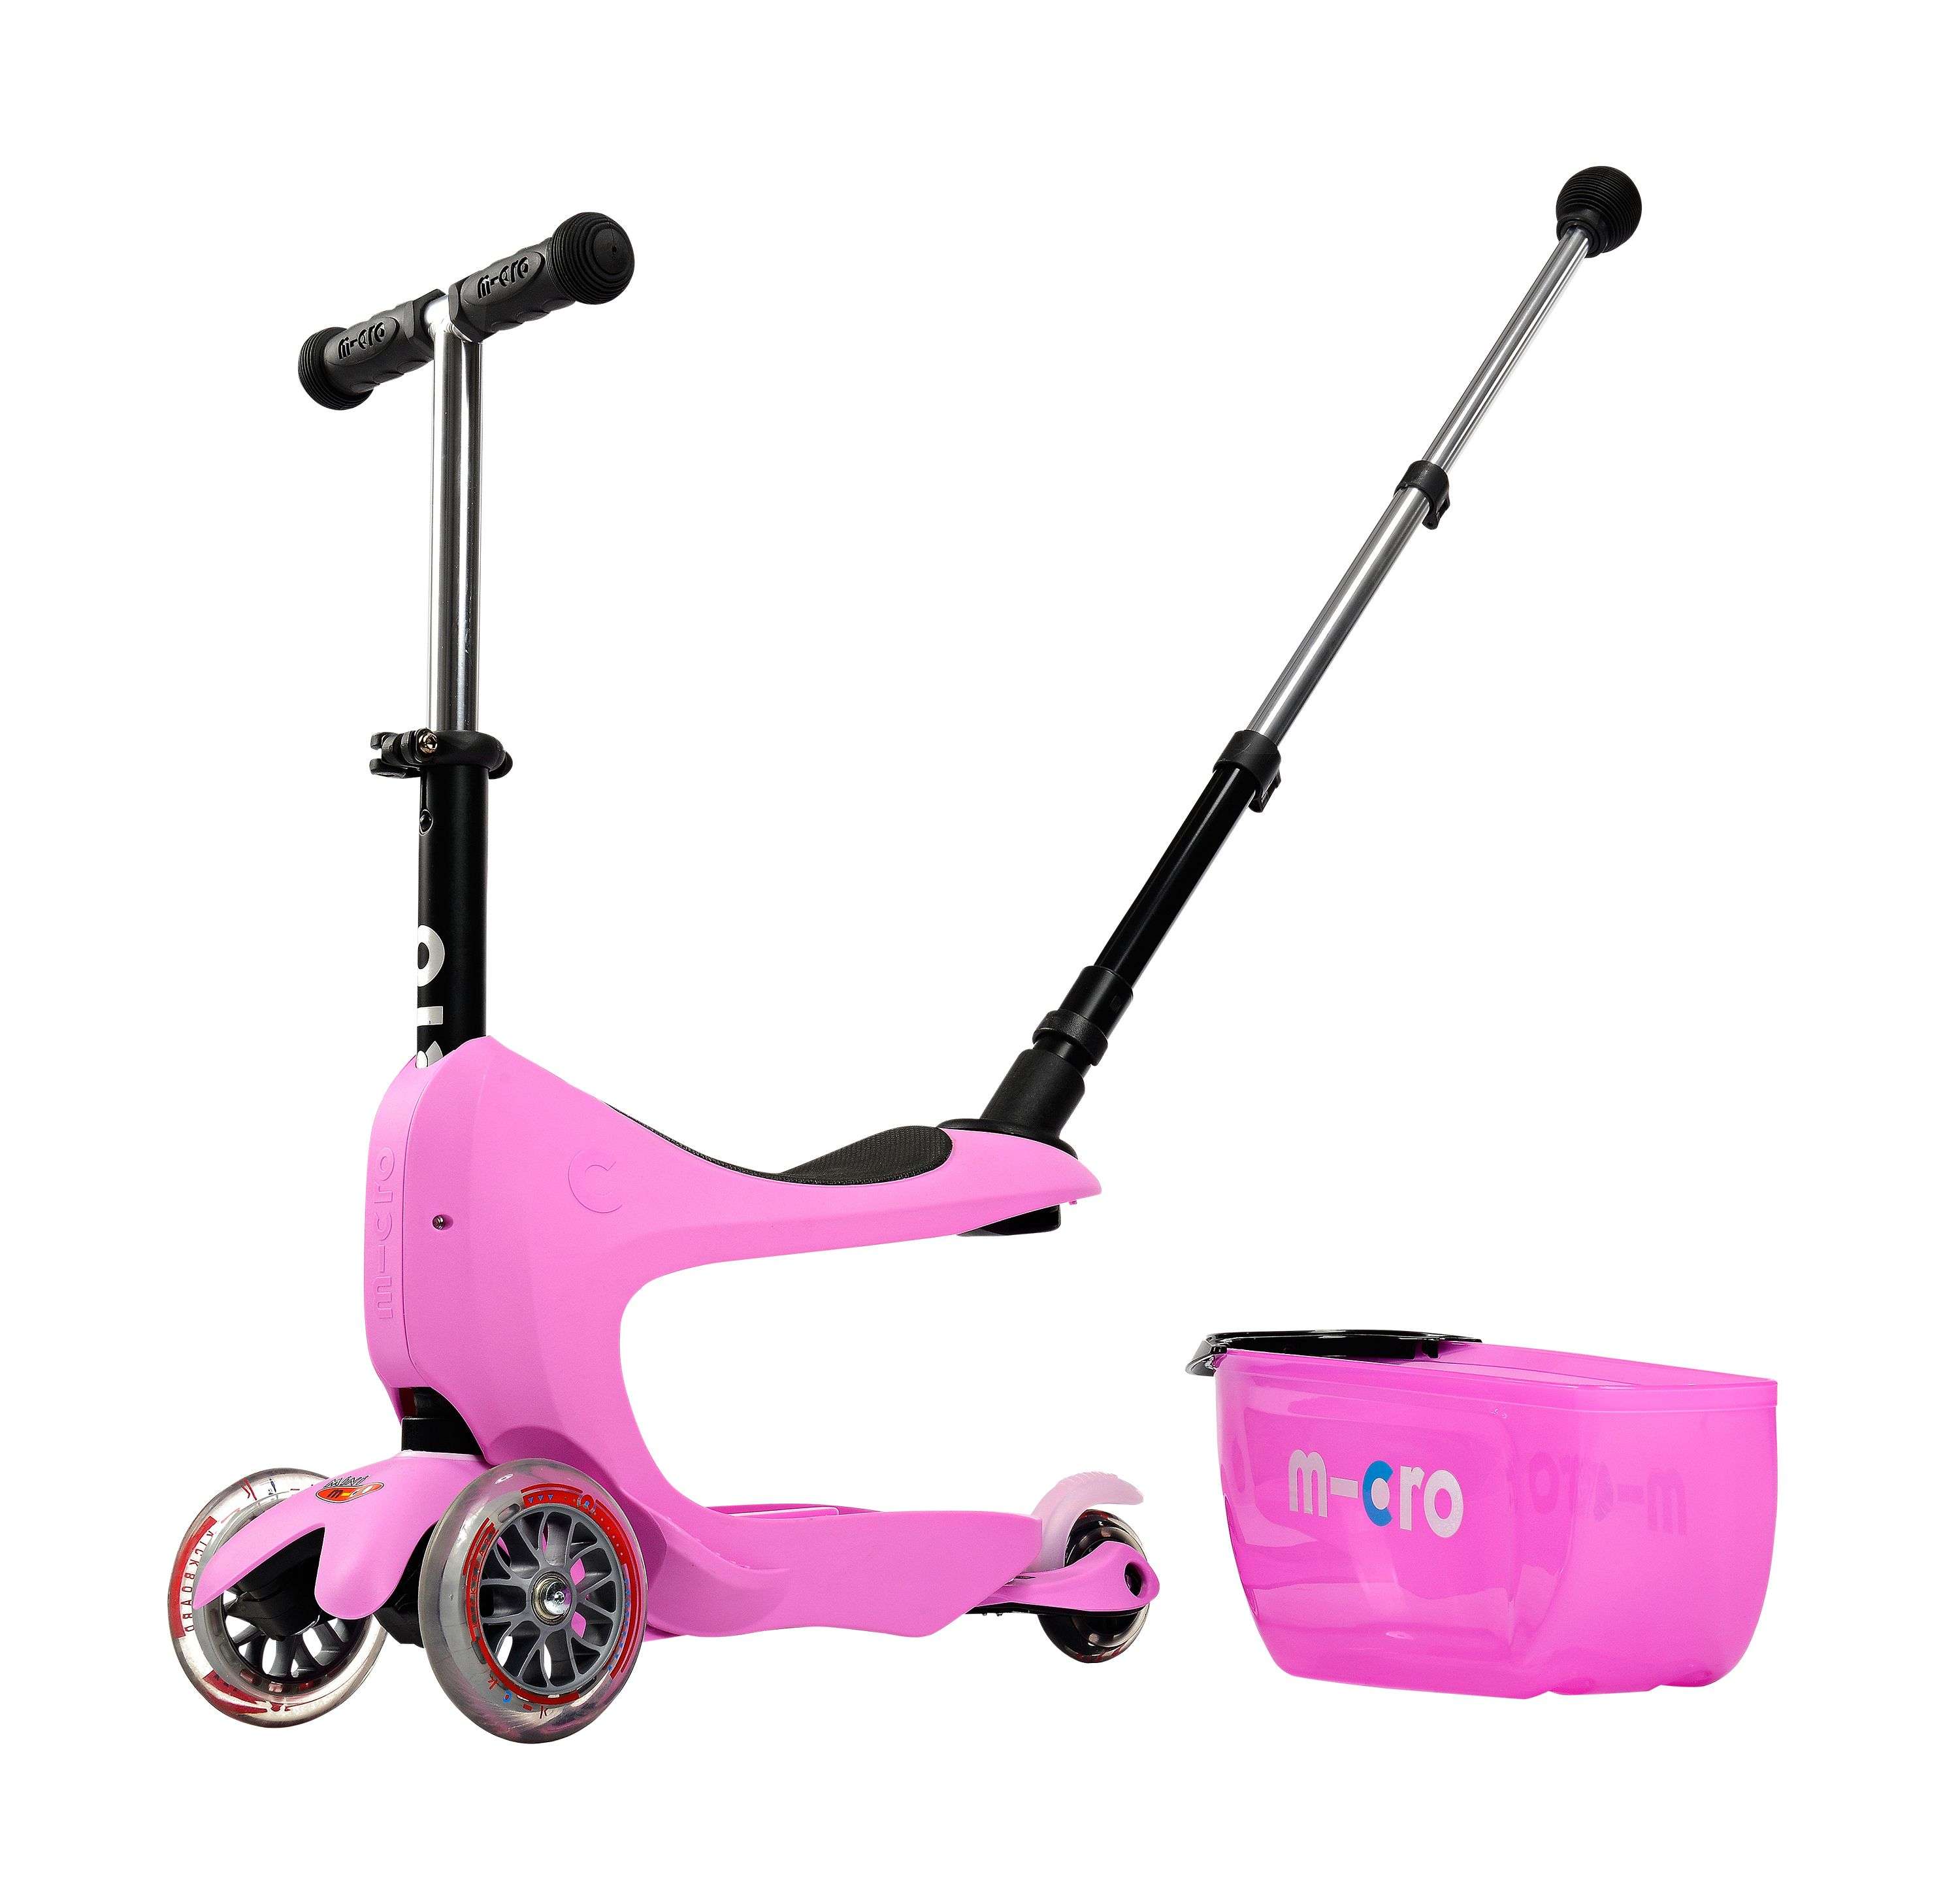 Micro - Mini2go Deluxe Plus Scooter - Pink (MMD033)